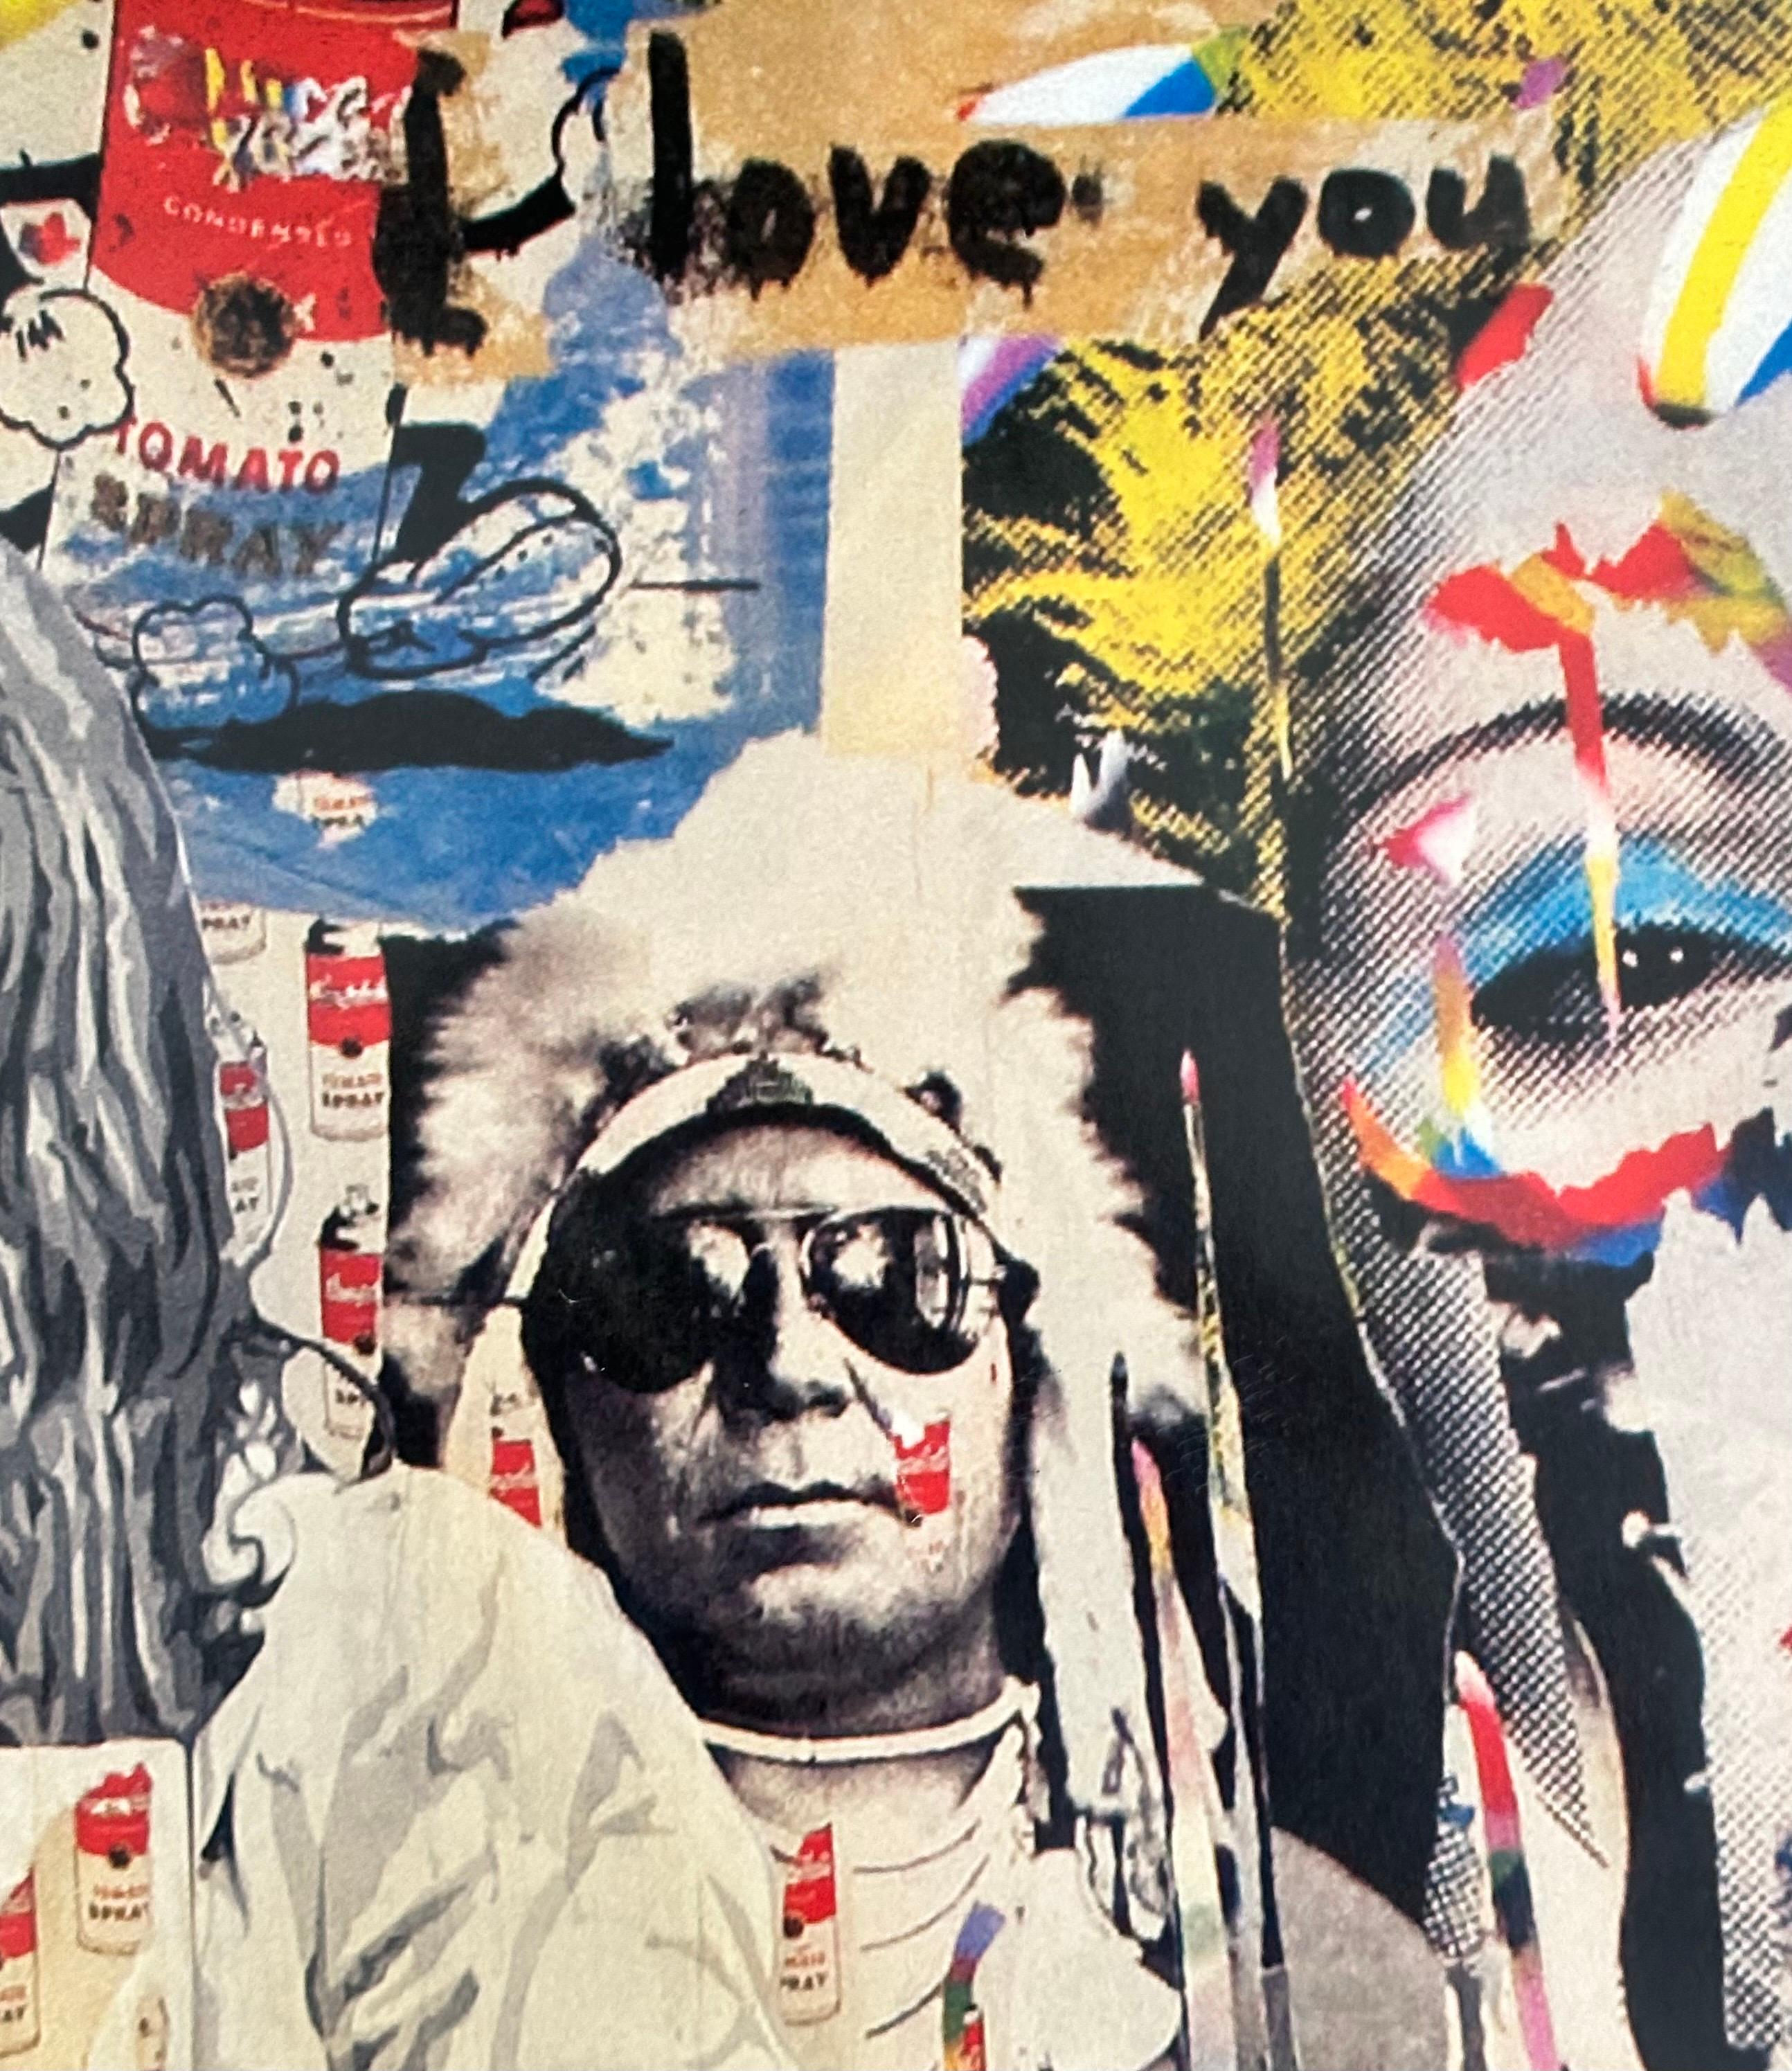 John Lennon & Yoko Ono Art Poster from the ICONS Exhibit by Mr. Brainwash For Sale 8